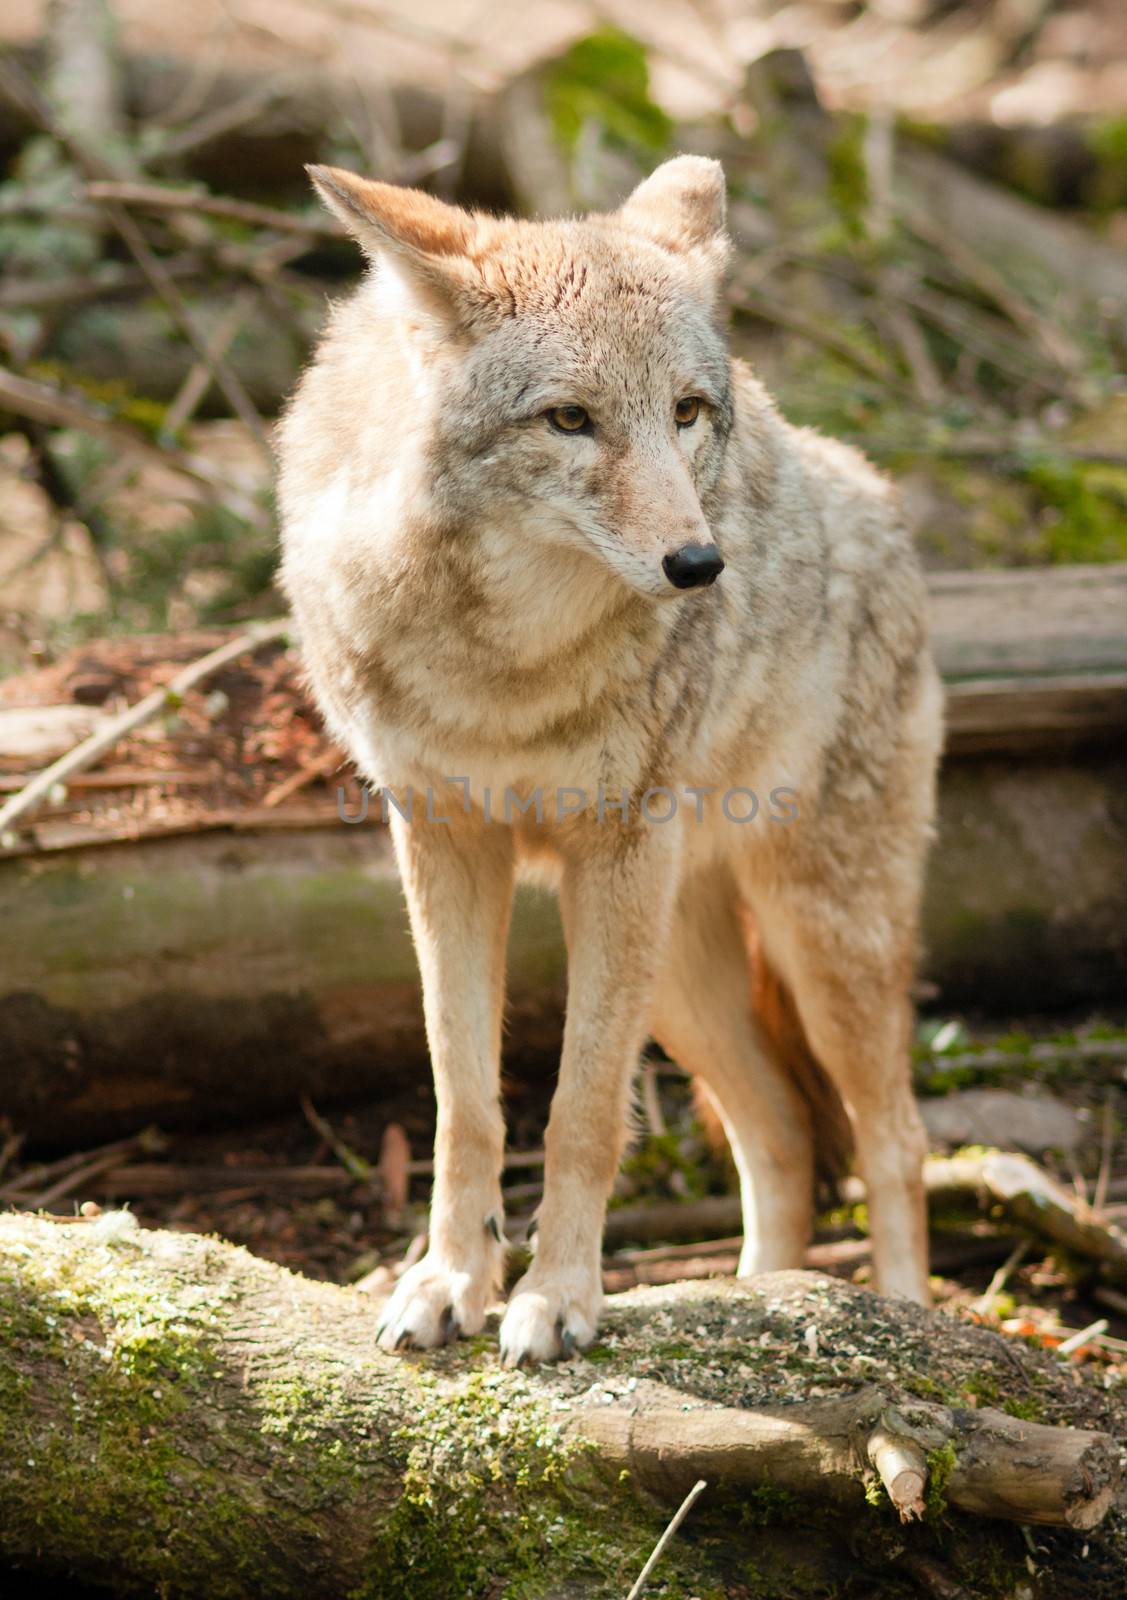 Wild Animal Coyote Stands On Stump Looking For Prey by ChrisBoswell